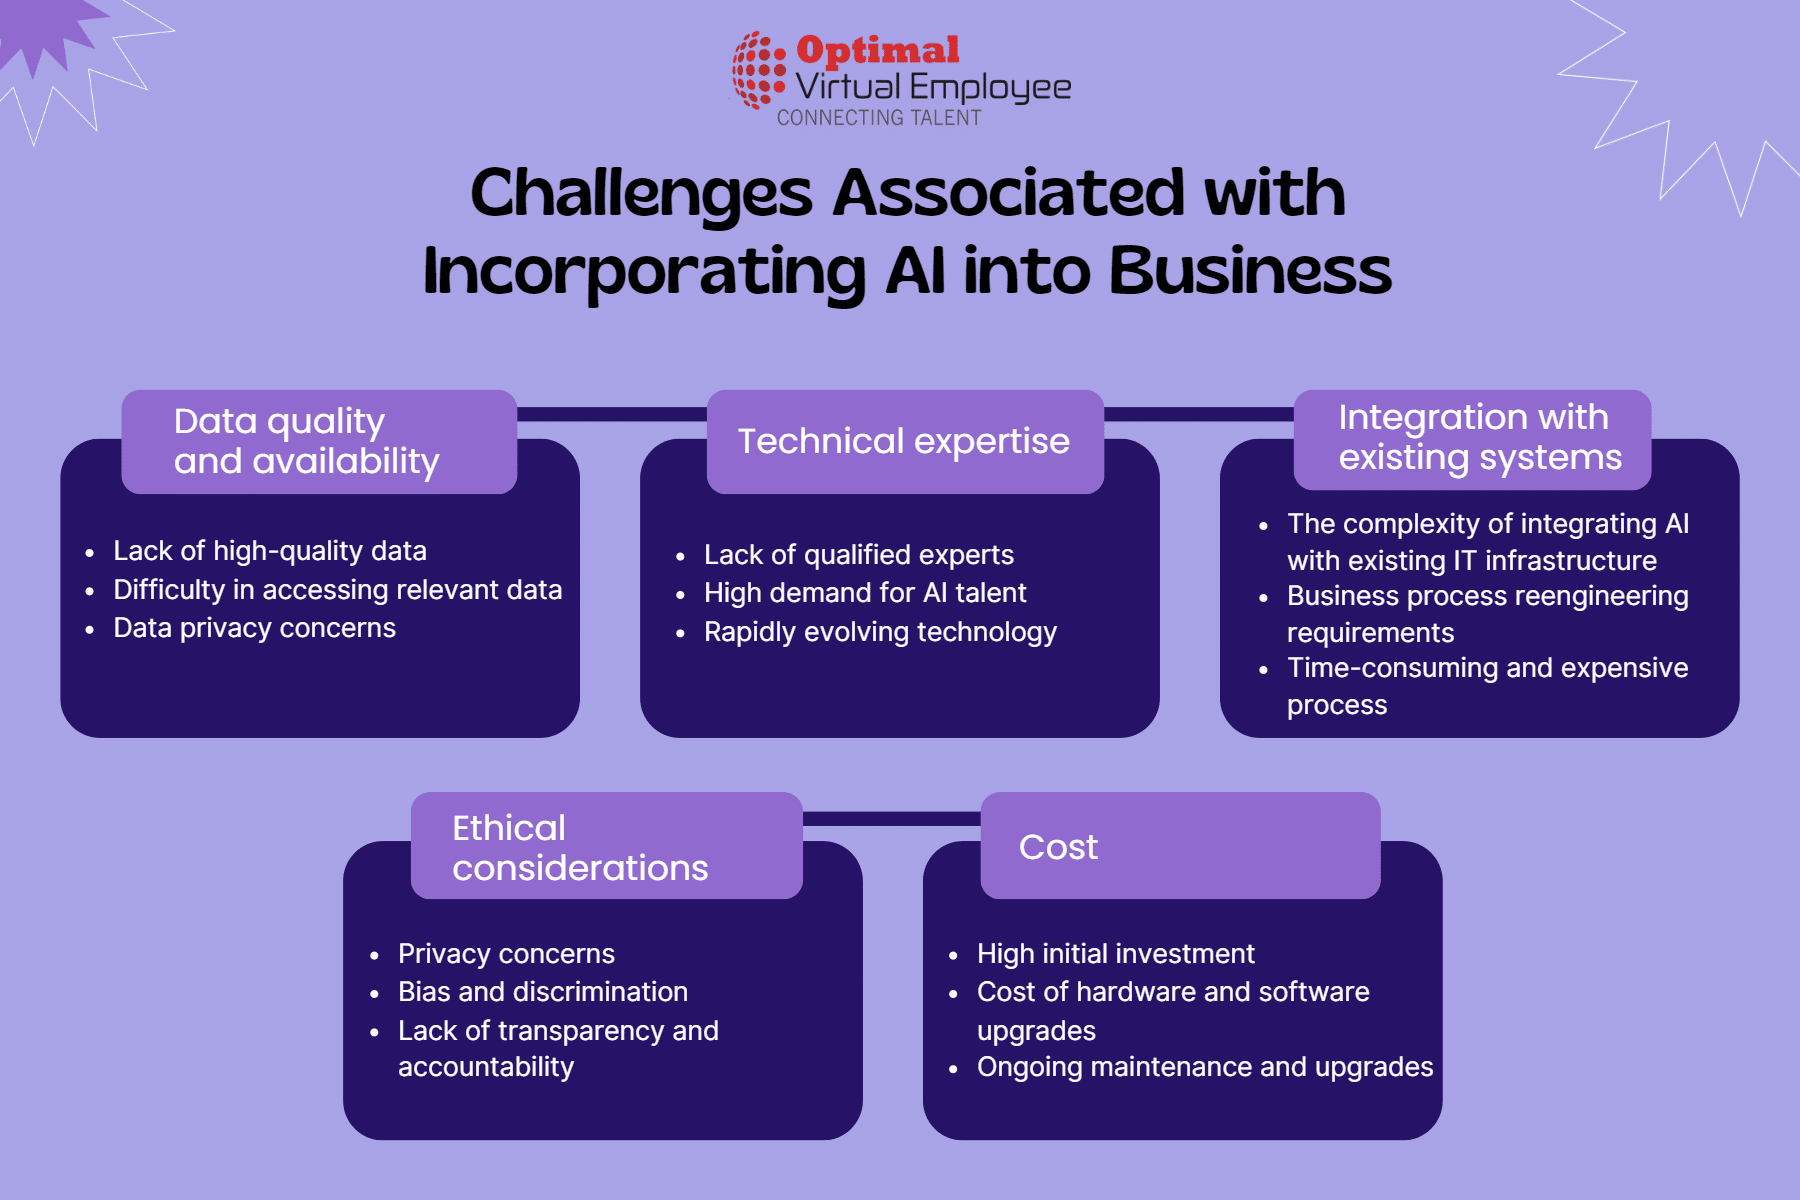 Challenges Associated with Incorporating AI into Business